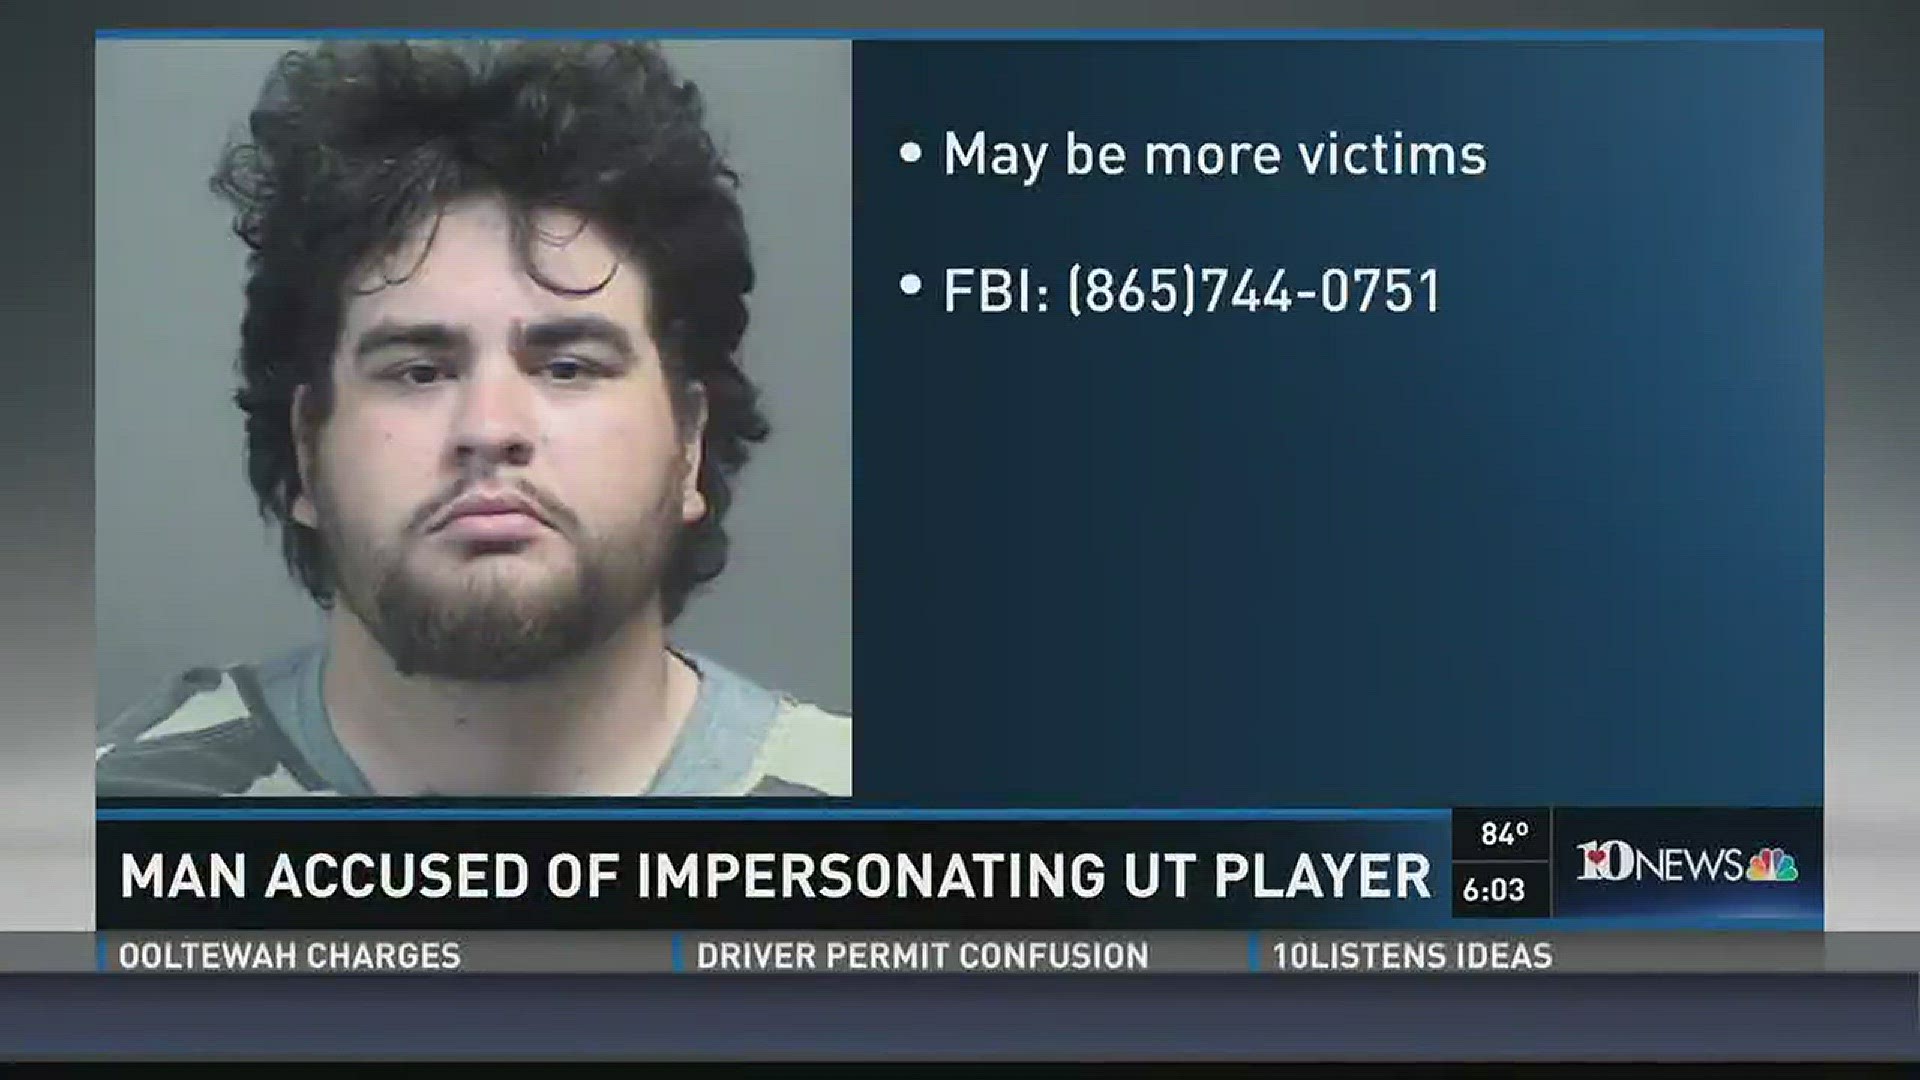 Federal authorities charged a Sweetwater man after they say he used Snapchat to impersonate a UT football player and attempted to extort money from the women he contacted.